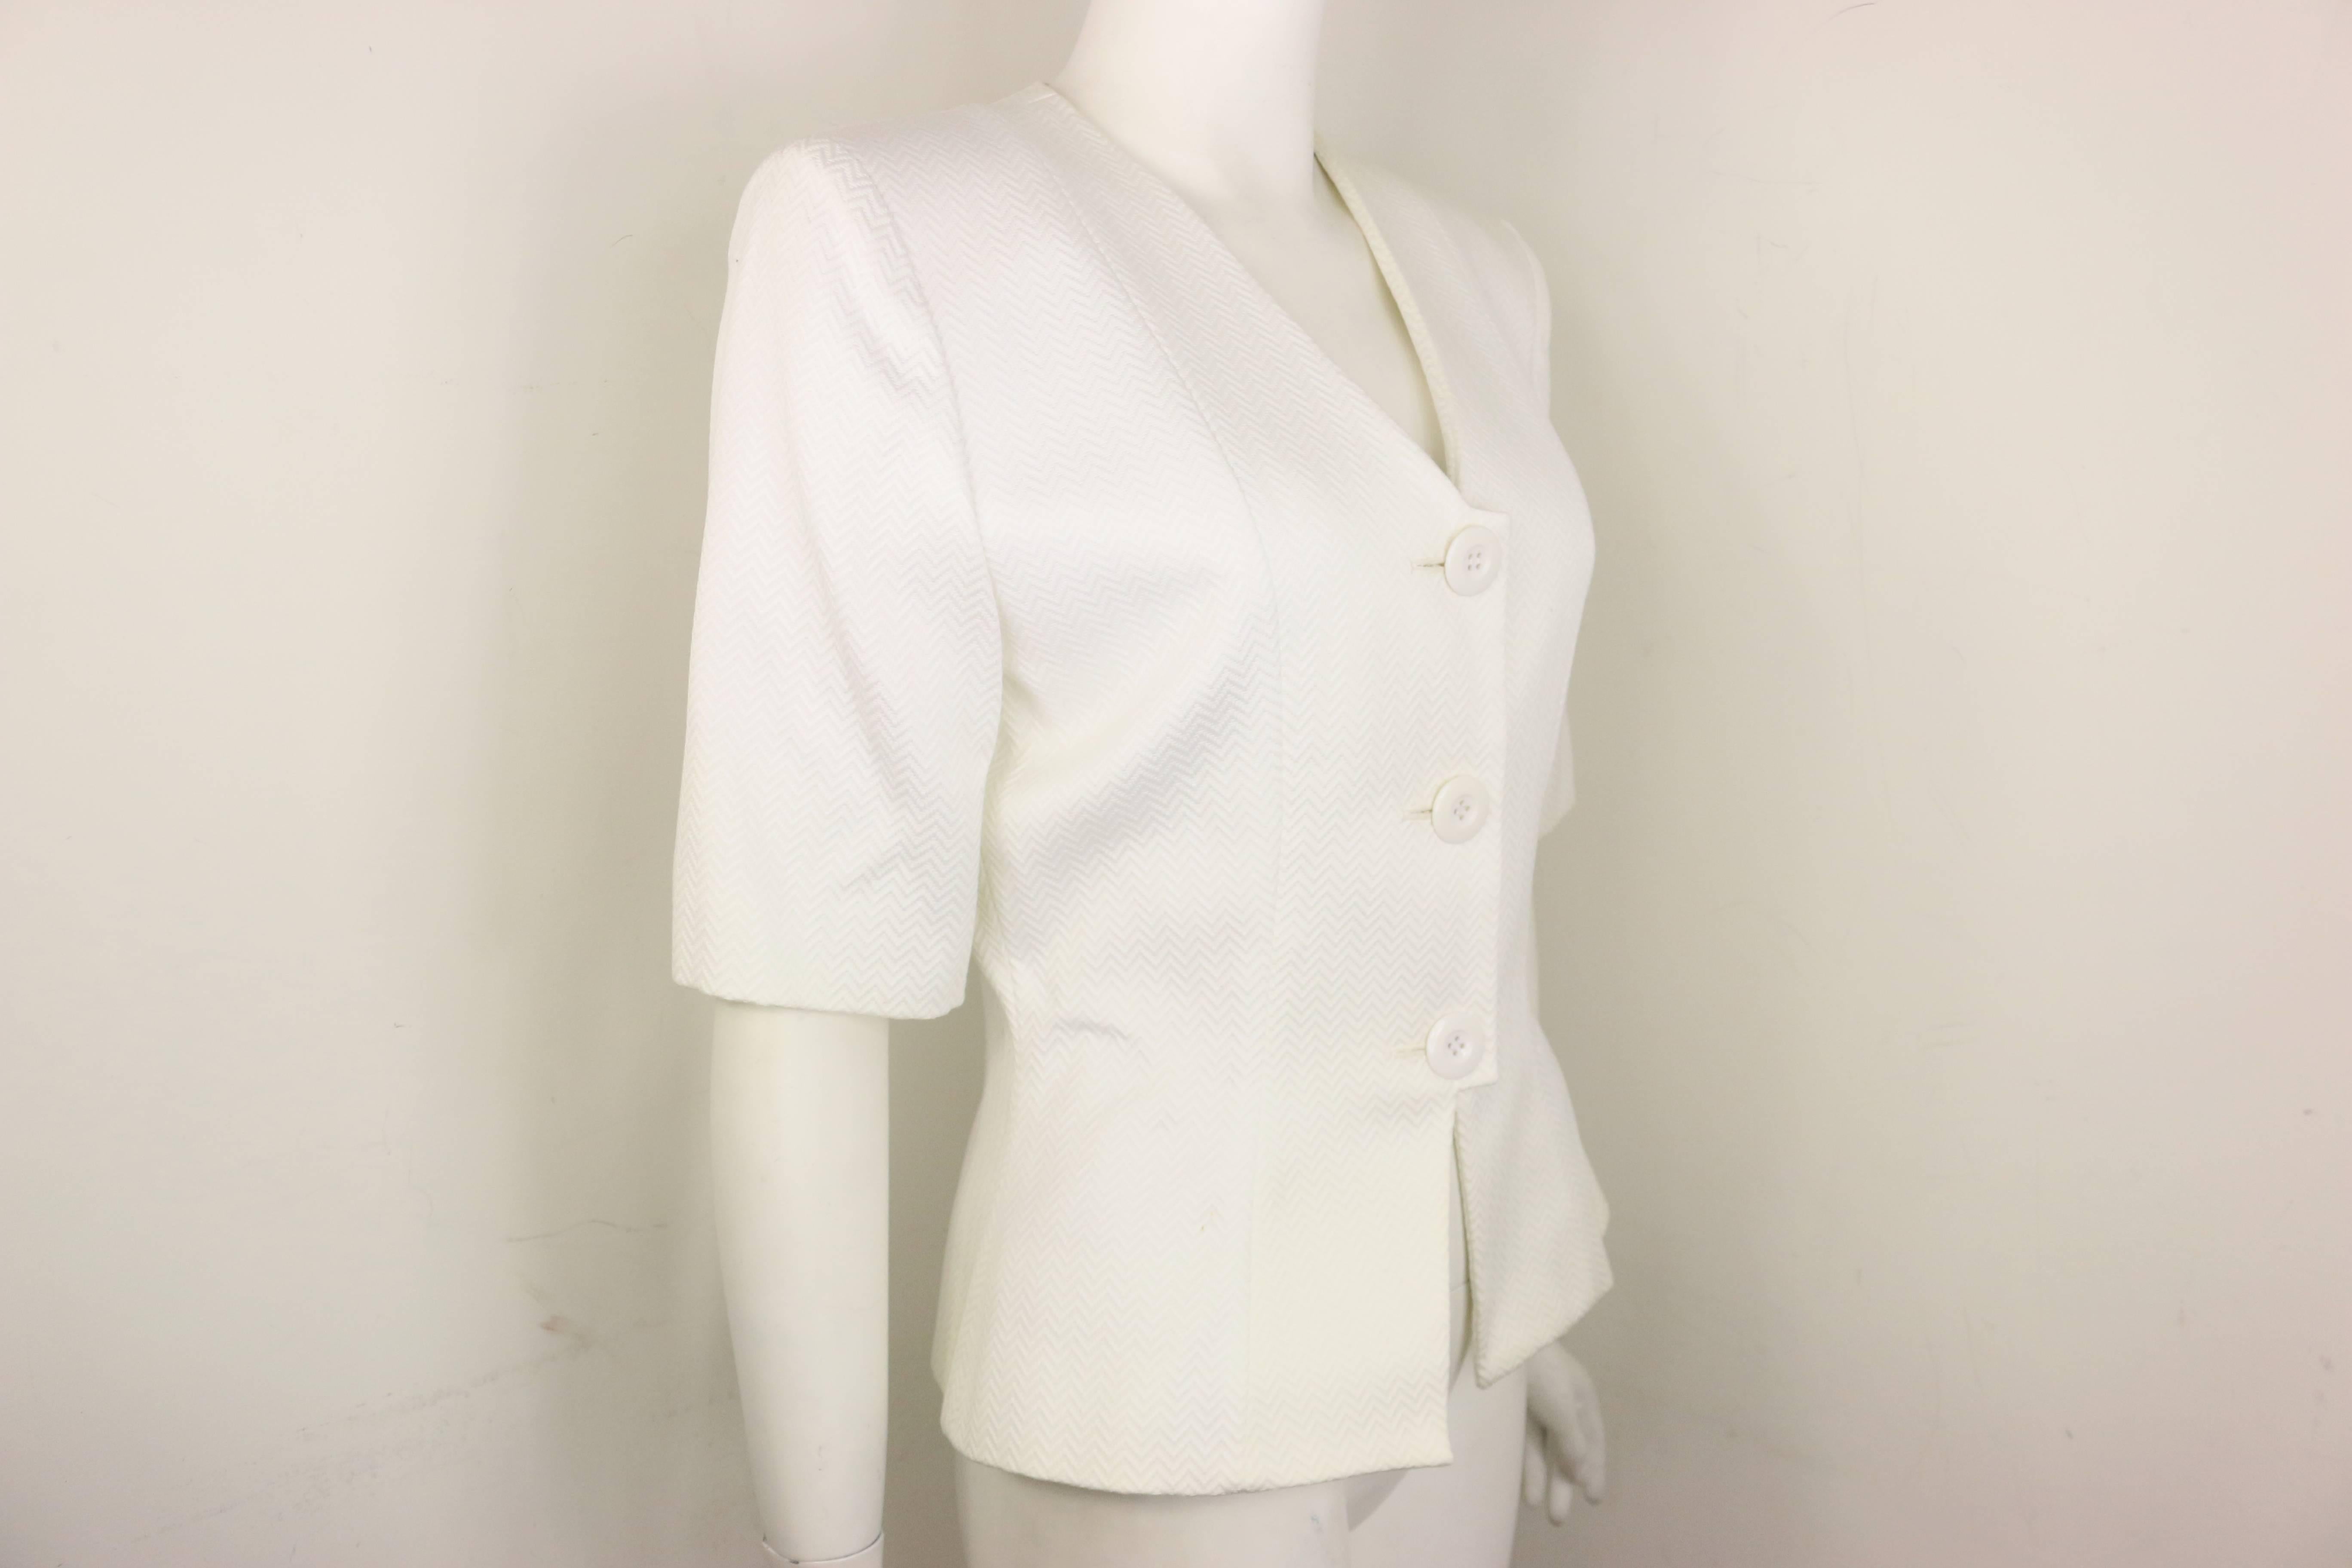 - Vintage Yves Saint Laurent white cotton short sleeves blazer. 

- Featuring a chevron pattern, a shoulder pad, v-shaped neckline, and white buttons closure. White button on each sleeve. 

- Size 38 FR, 6 US. 



- 